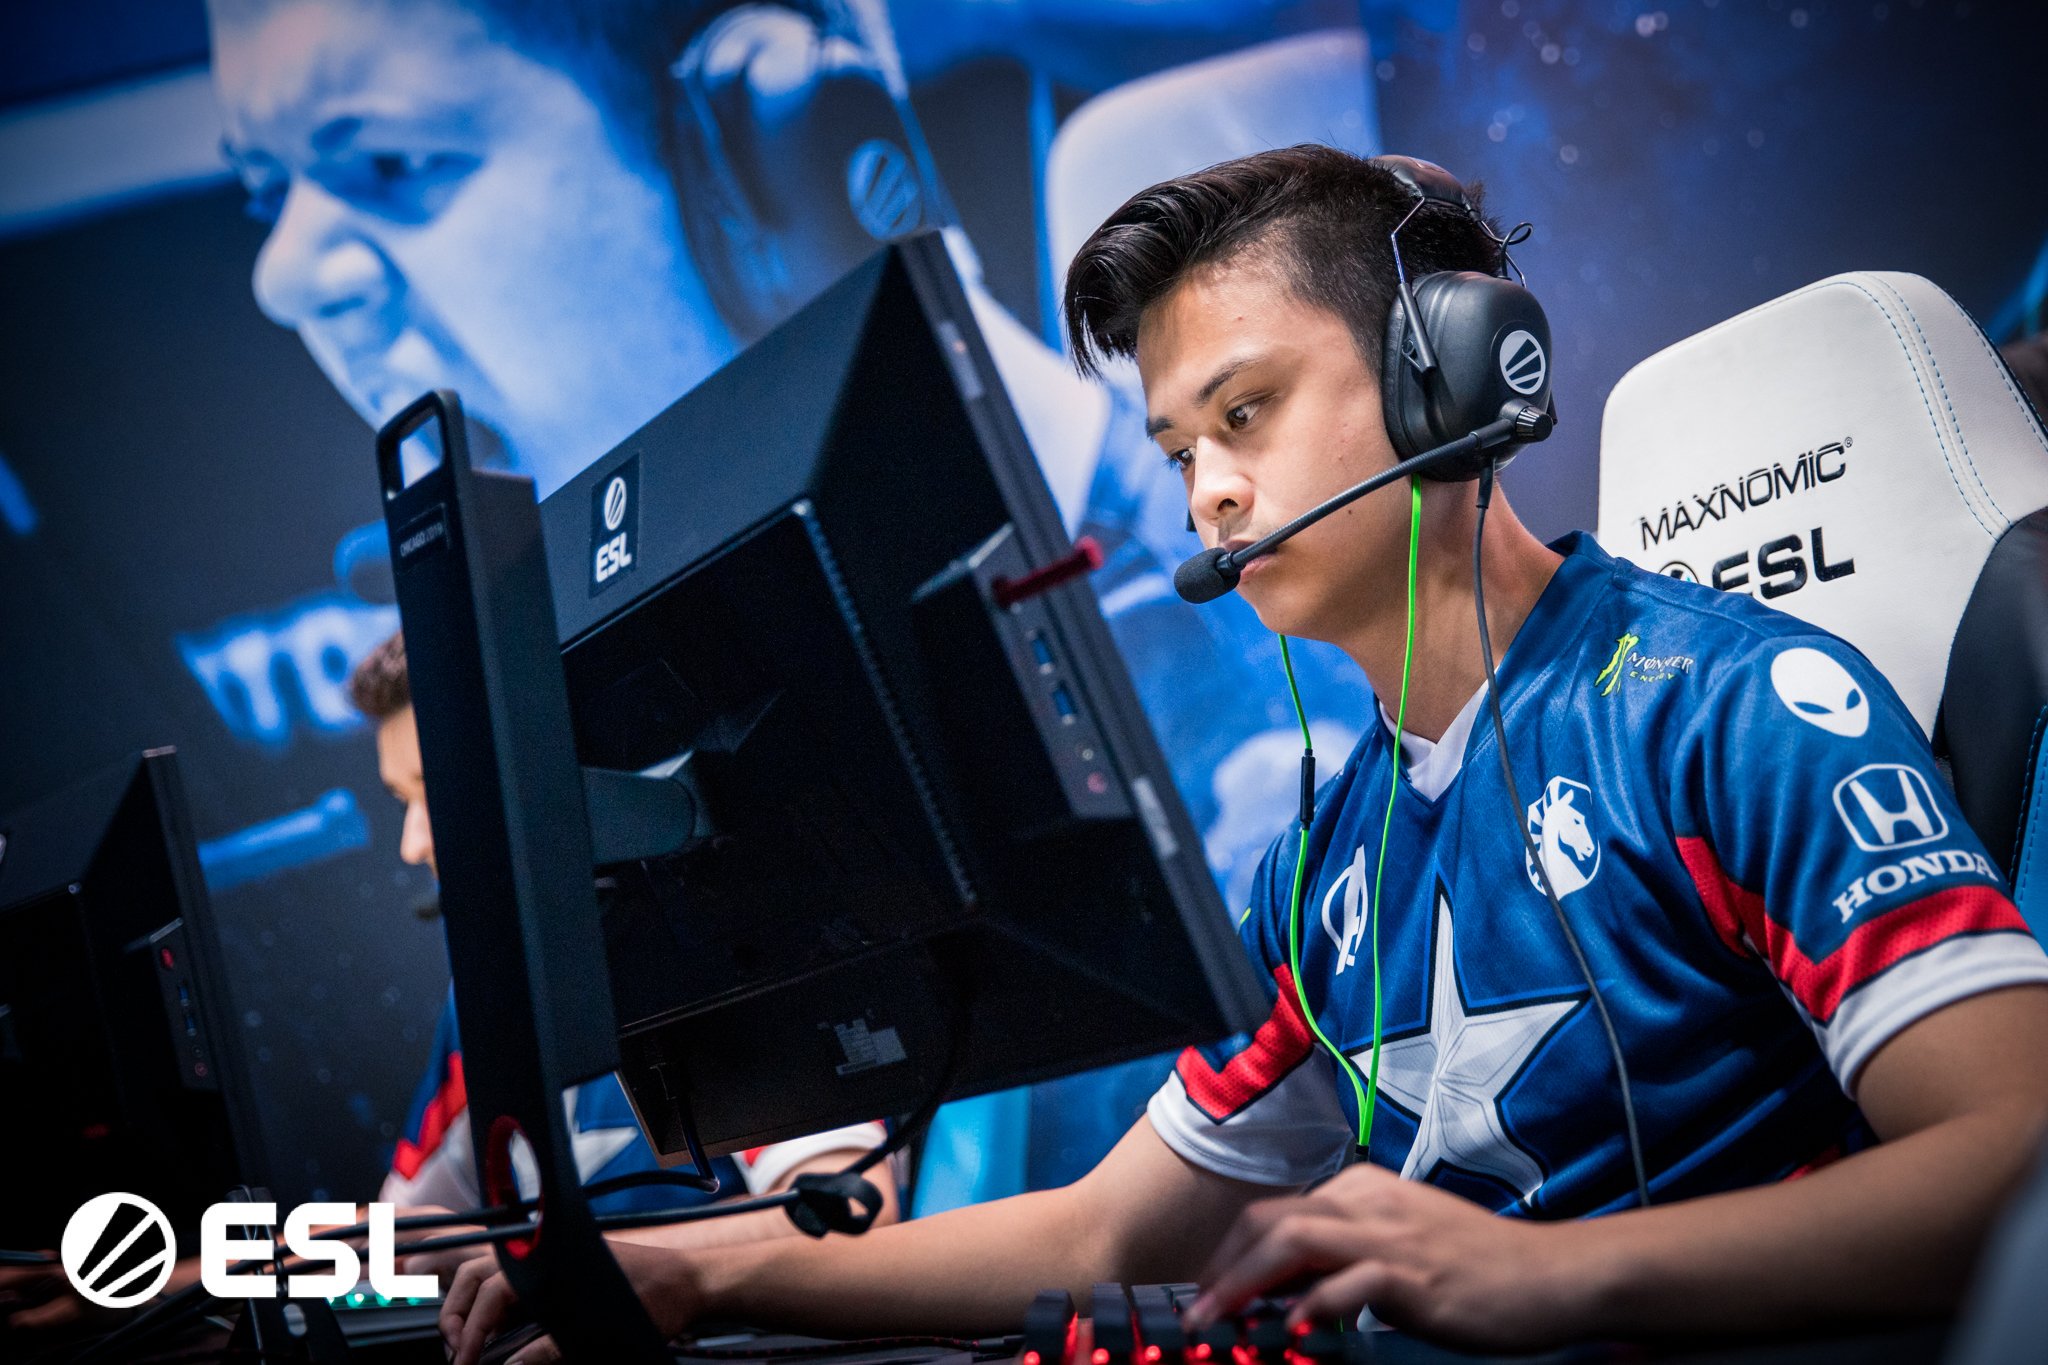 Stewie competing with Team Liquid in 2019